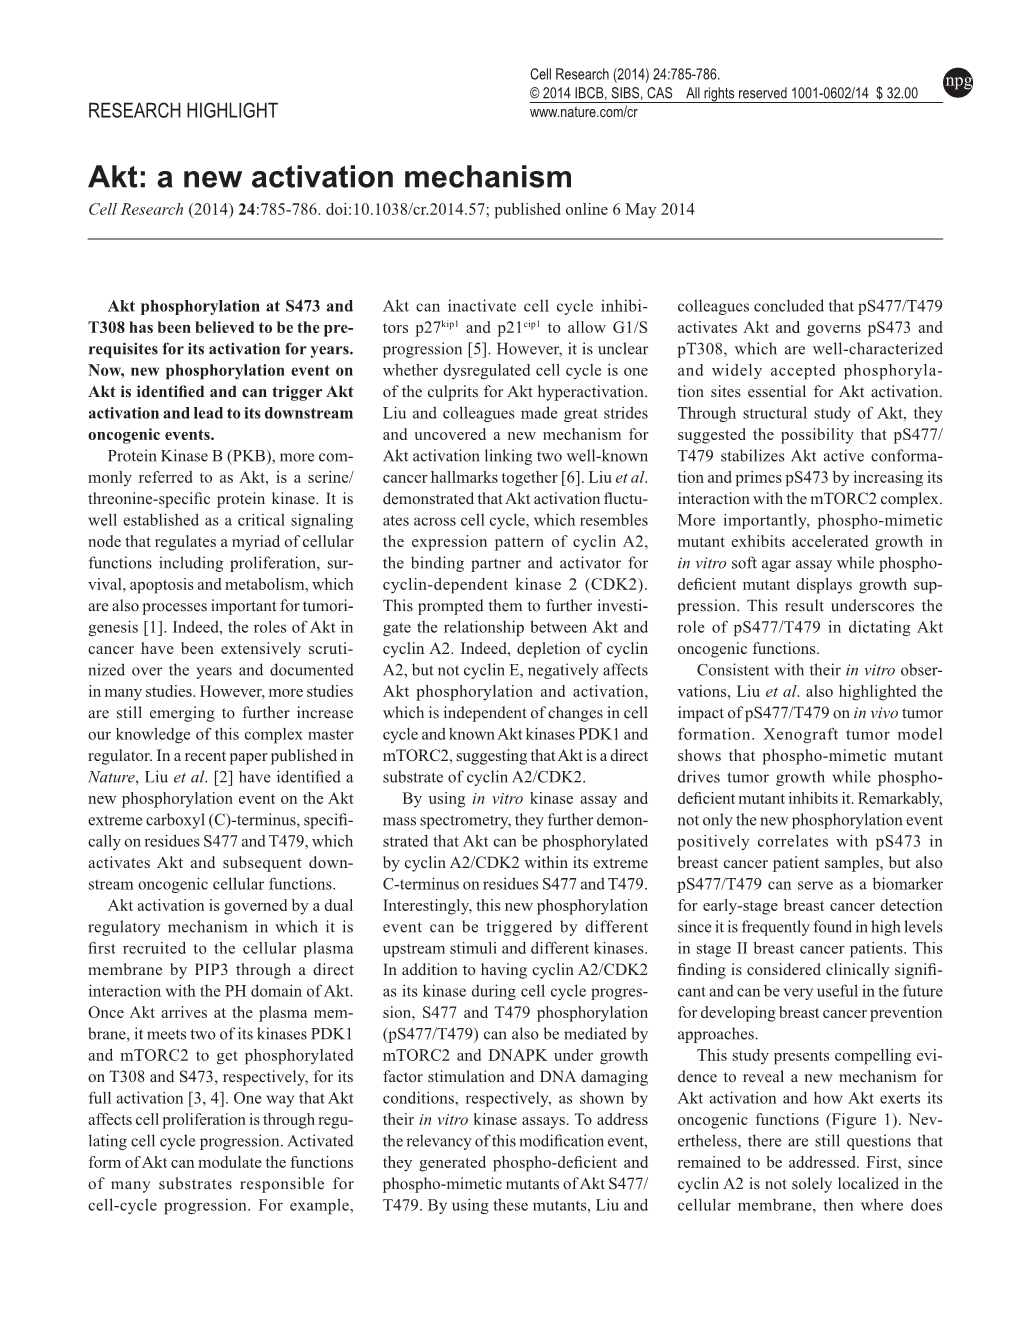 Akt: a New Activation Mechanism Cell Research (2014) 24:785-786